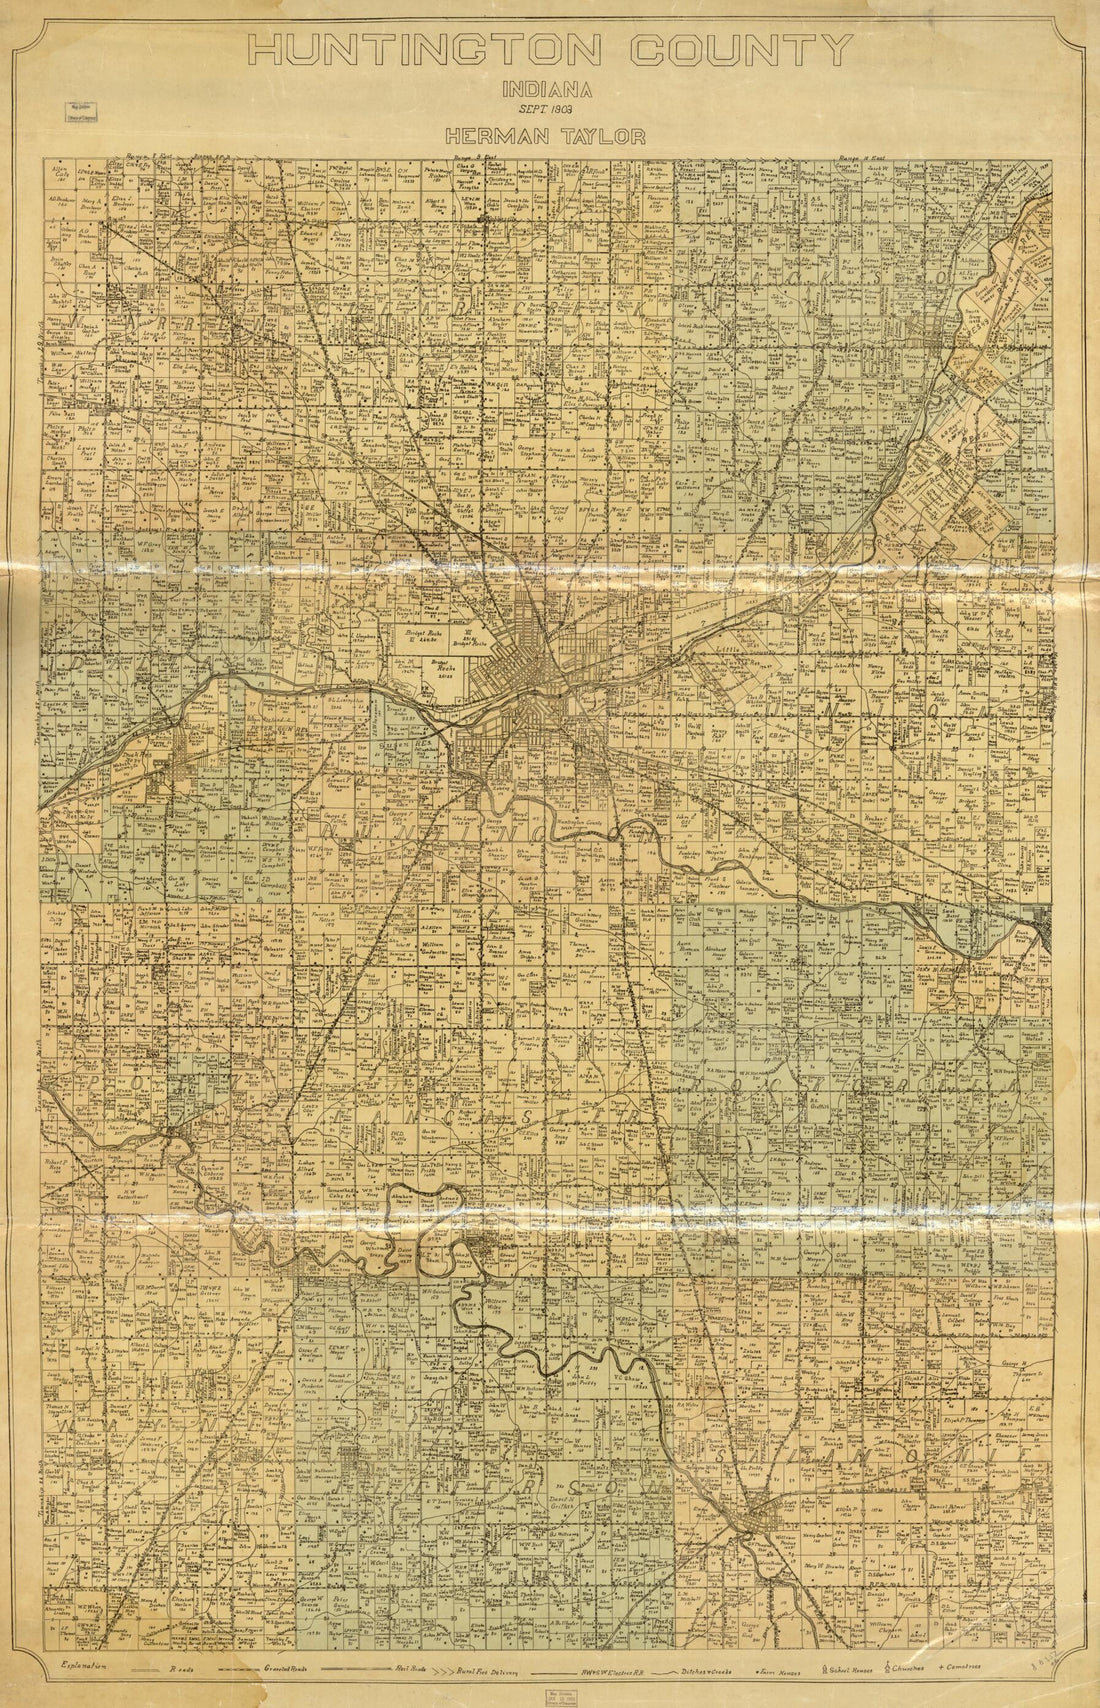 This old map of Huntington County, Indiana from 1903 was created by Herman Taylor in 1903